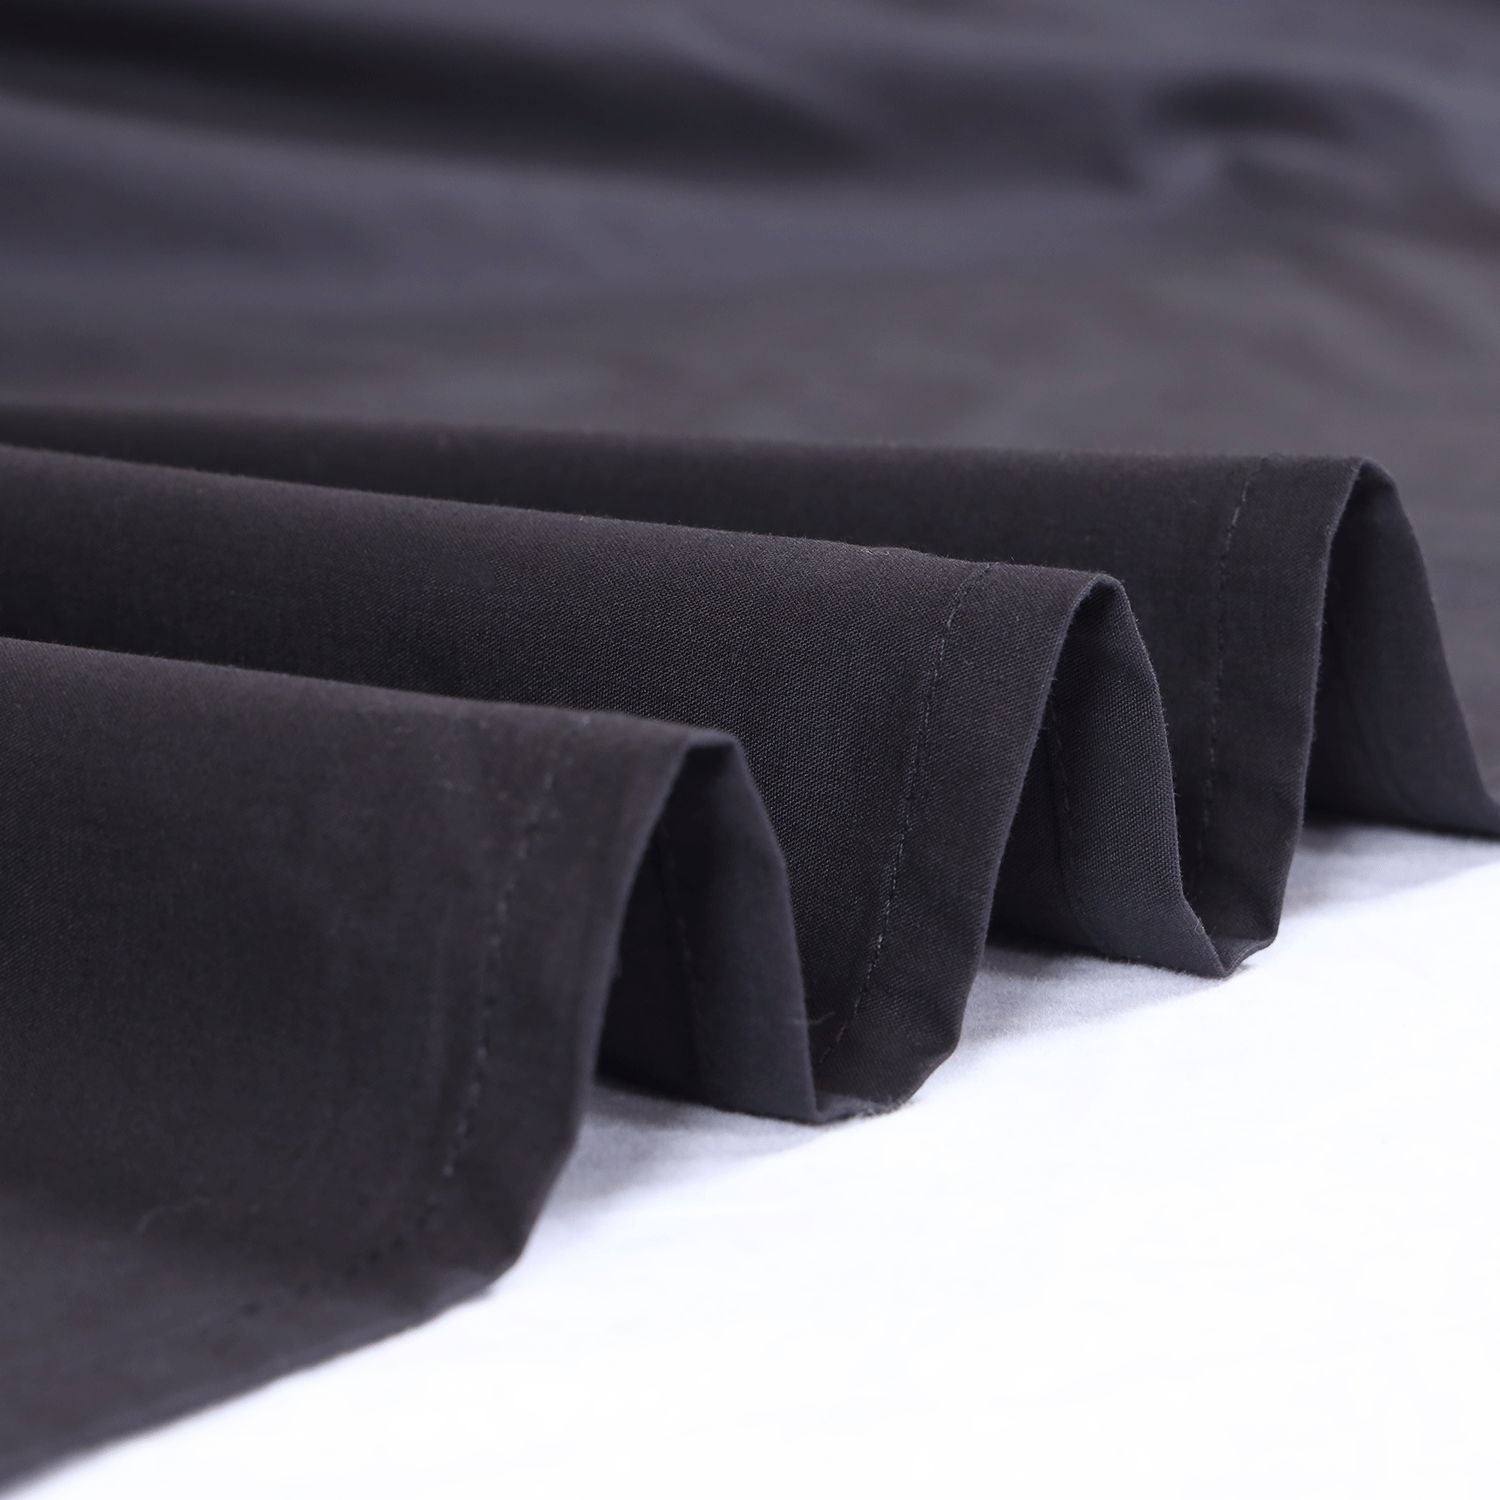 Premium Cotton Dyed Fitted Sheet Set- 4 Pcs